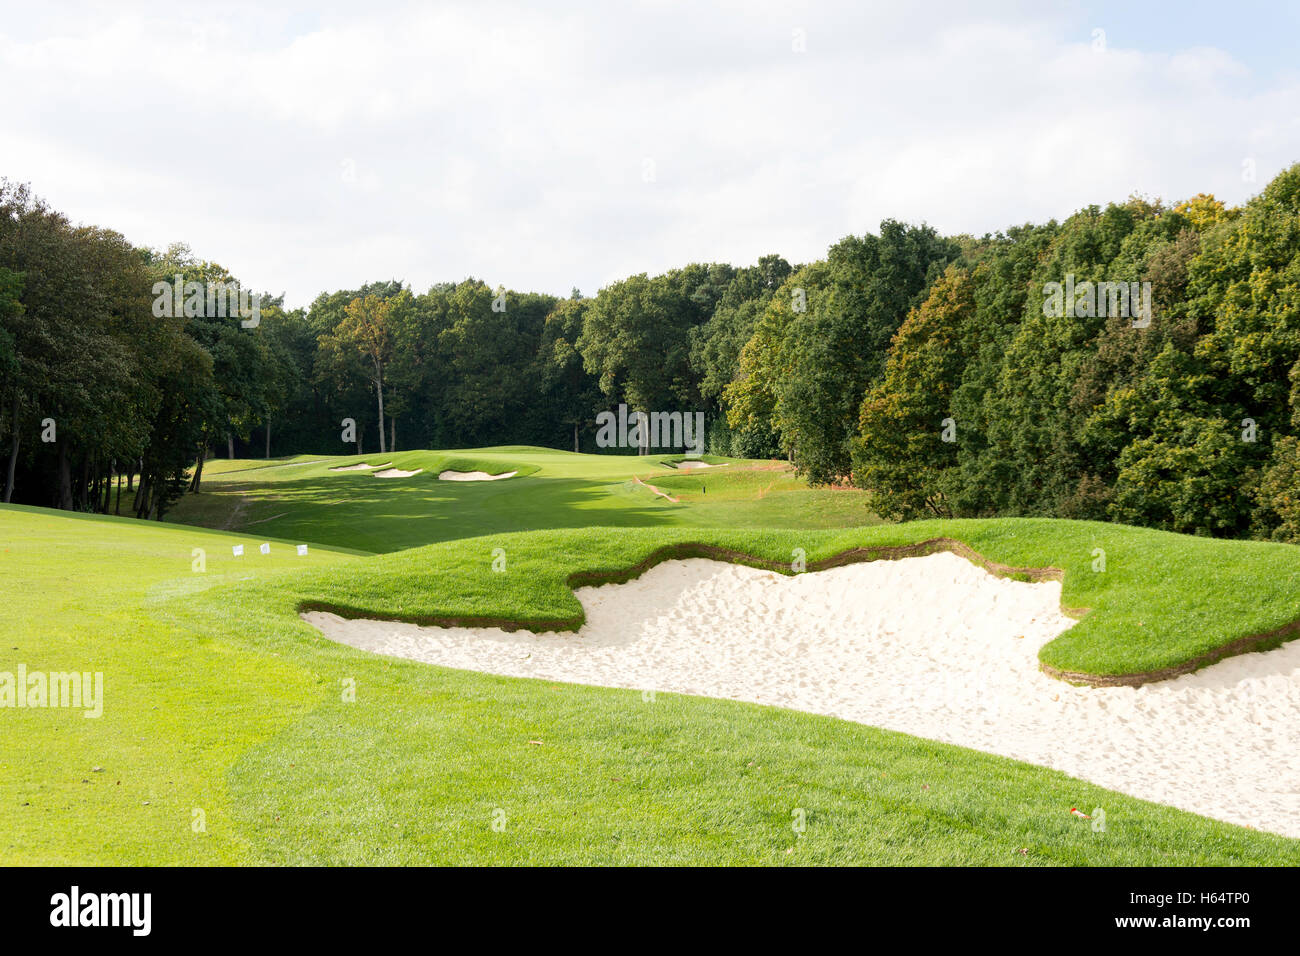 Le golf fairway et bunkers au Wentworth Golf Club & Resort, Virginia Water, Surrey, Angleterre, Royaume-Uni Banque D'Images